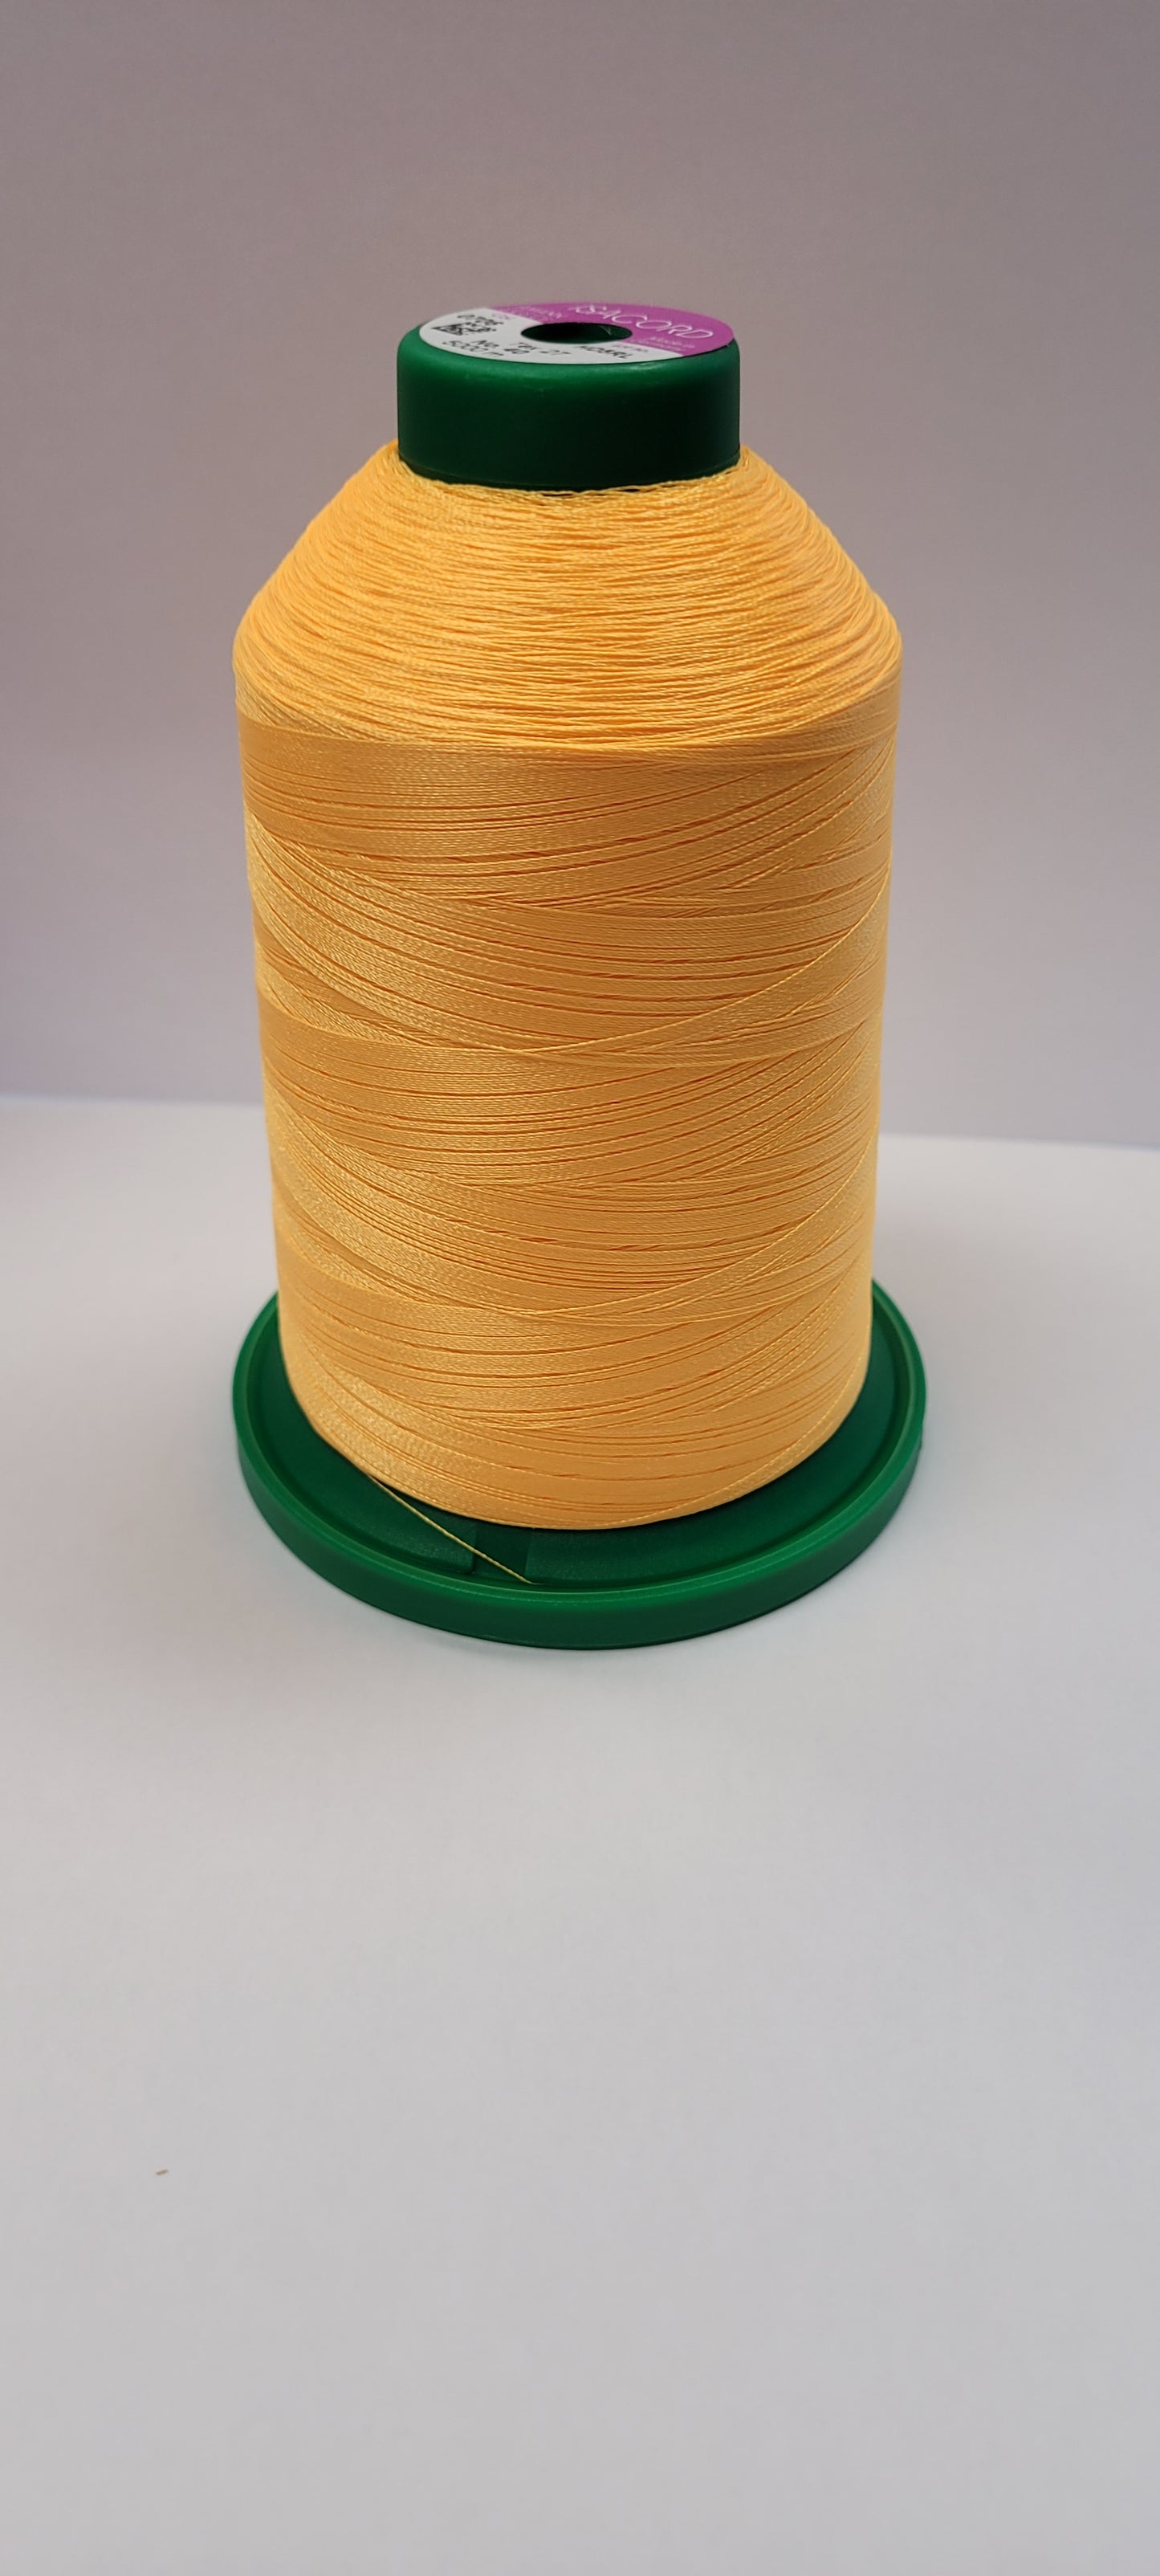 ISACORD 40 KS 5000M - 100% Polyester Embroidery Threads - Discontinued Colours